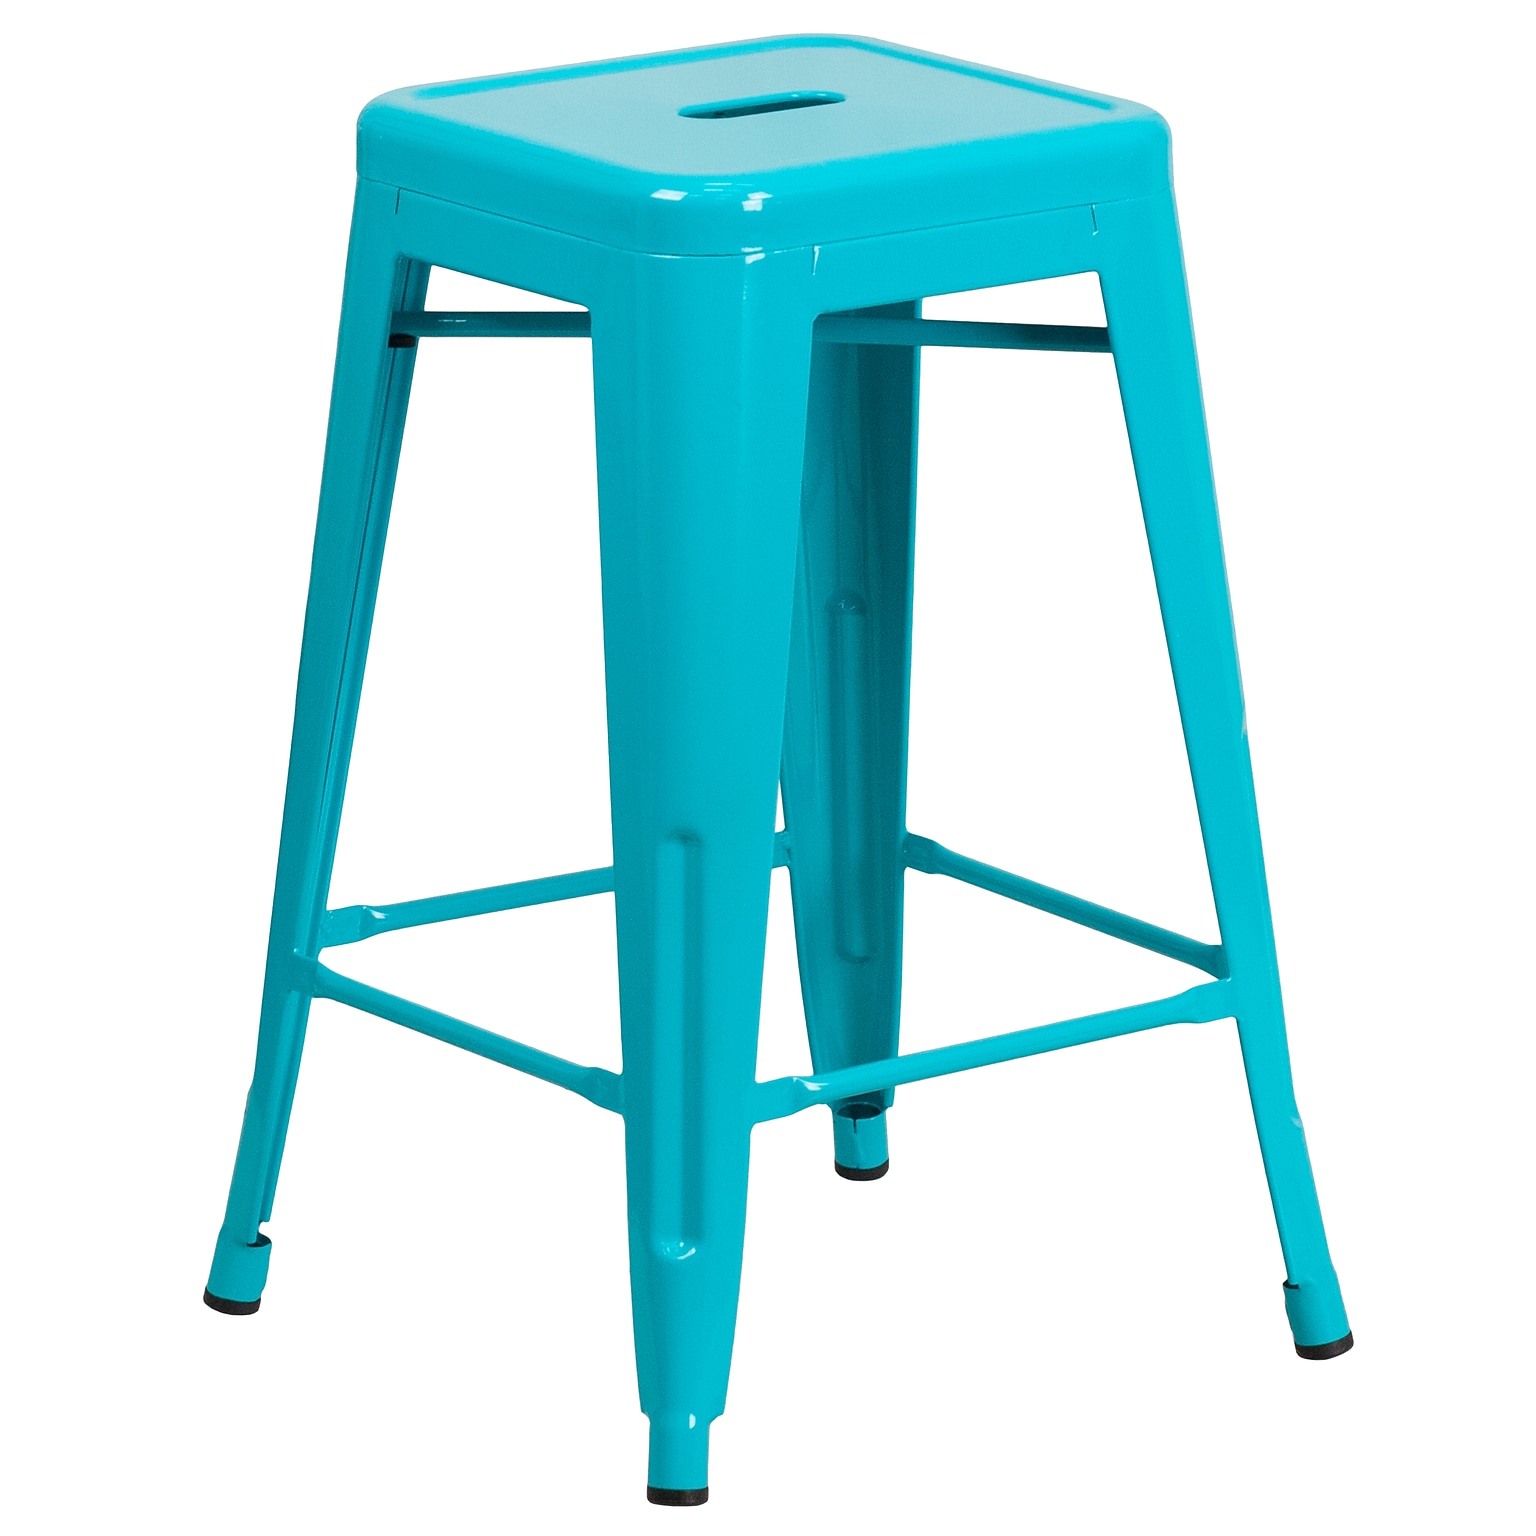 Flash Furniture Colorful Restaurant Counter Height Stool, Crystal Teal-Blue (ETBT350324CB)